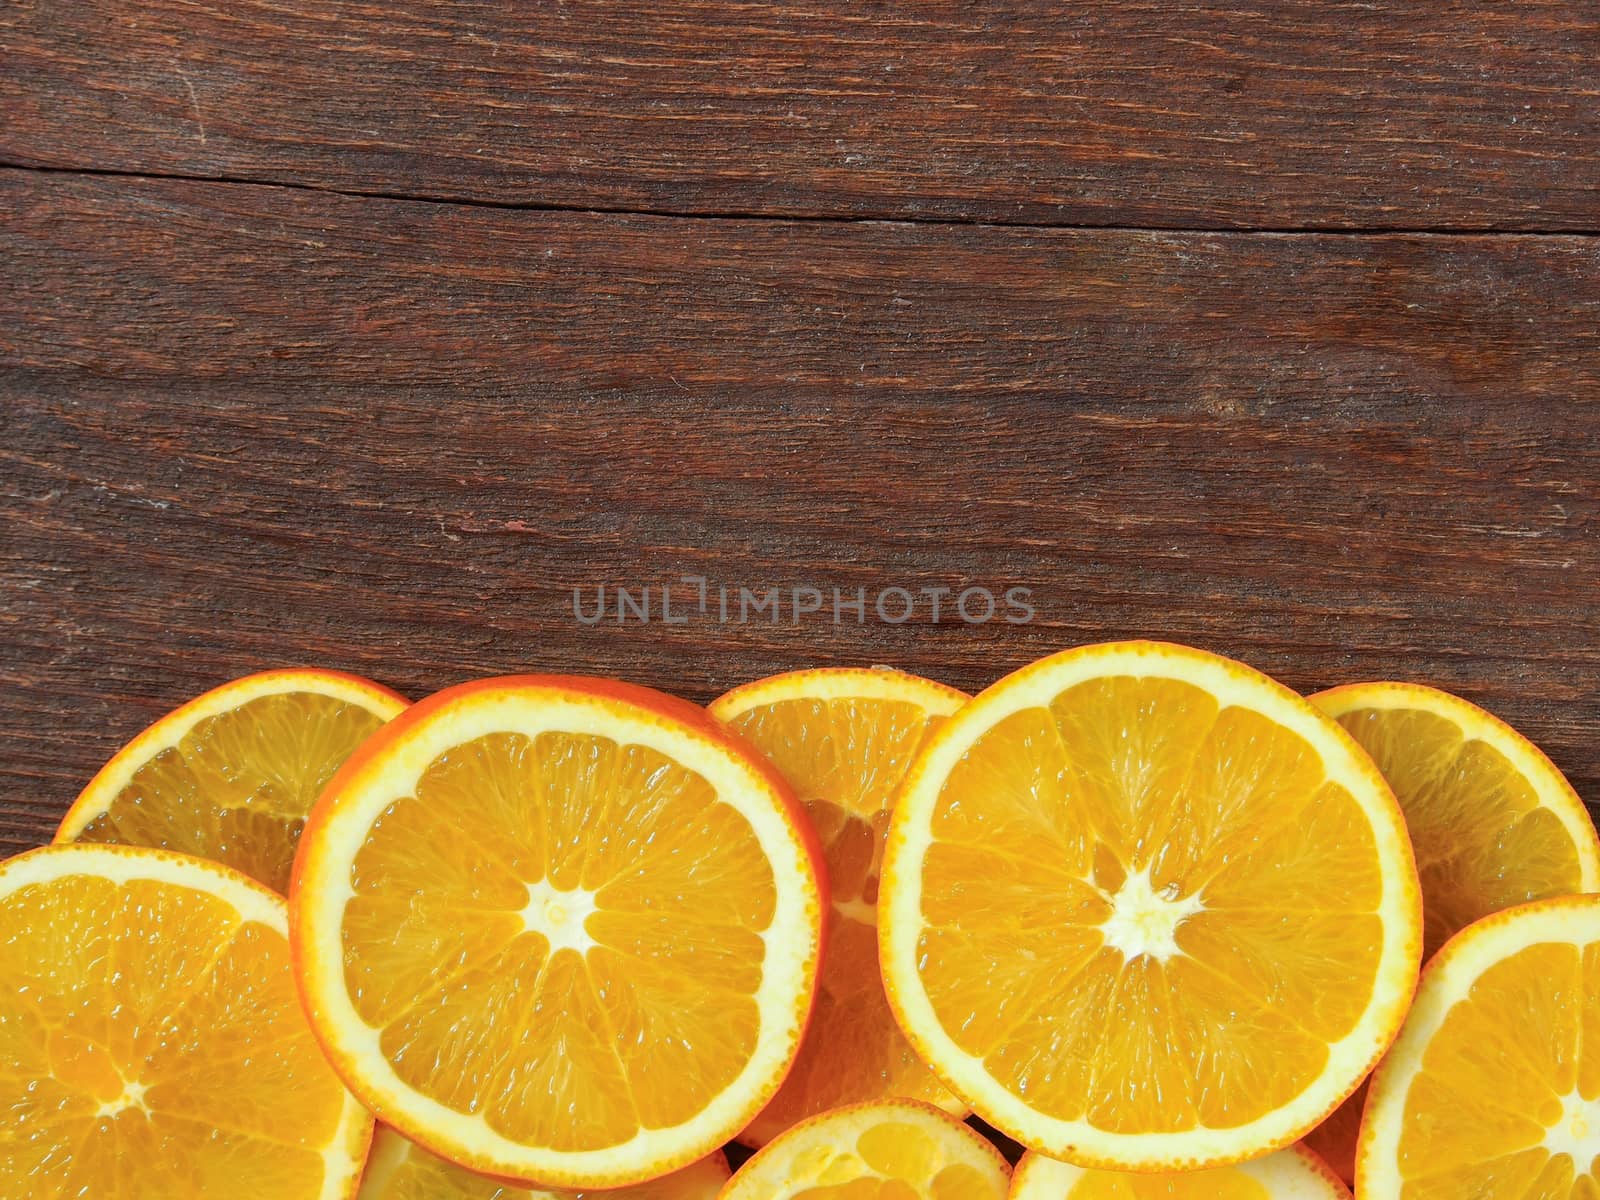 orange halves placed on a wooden table